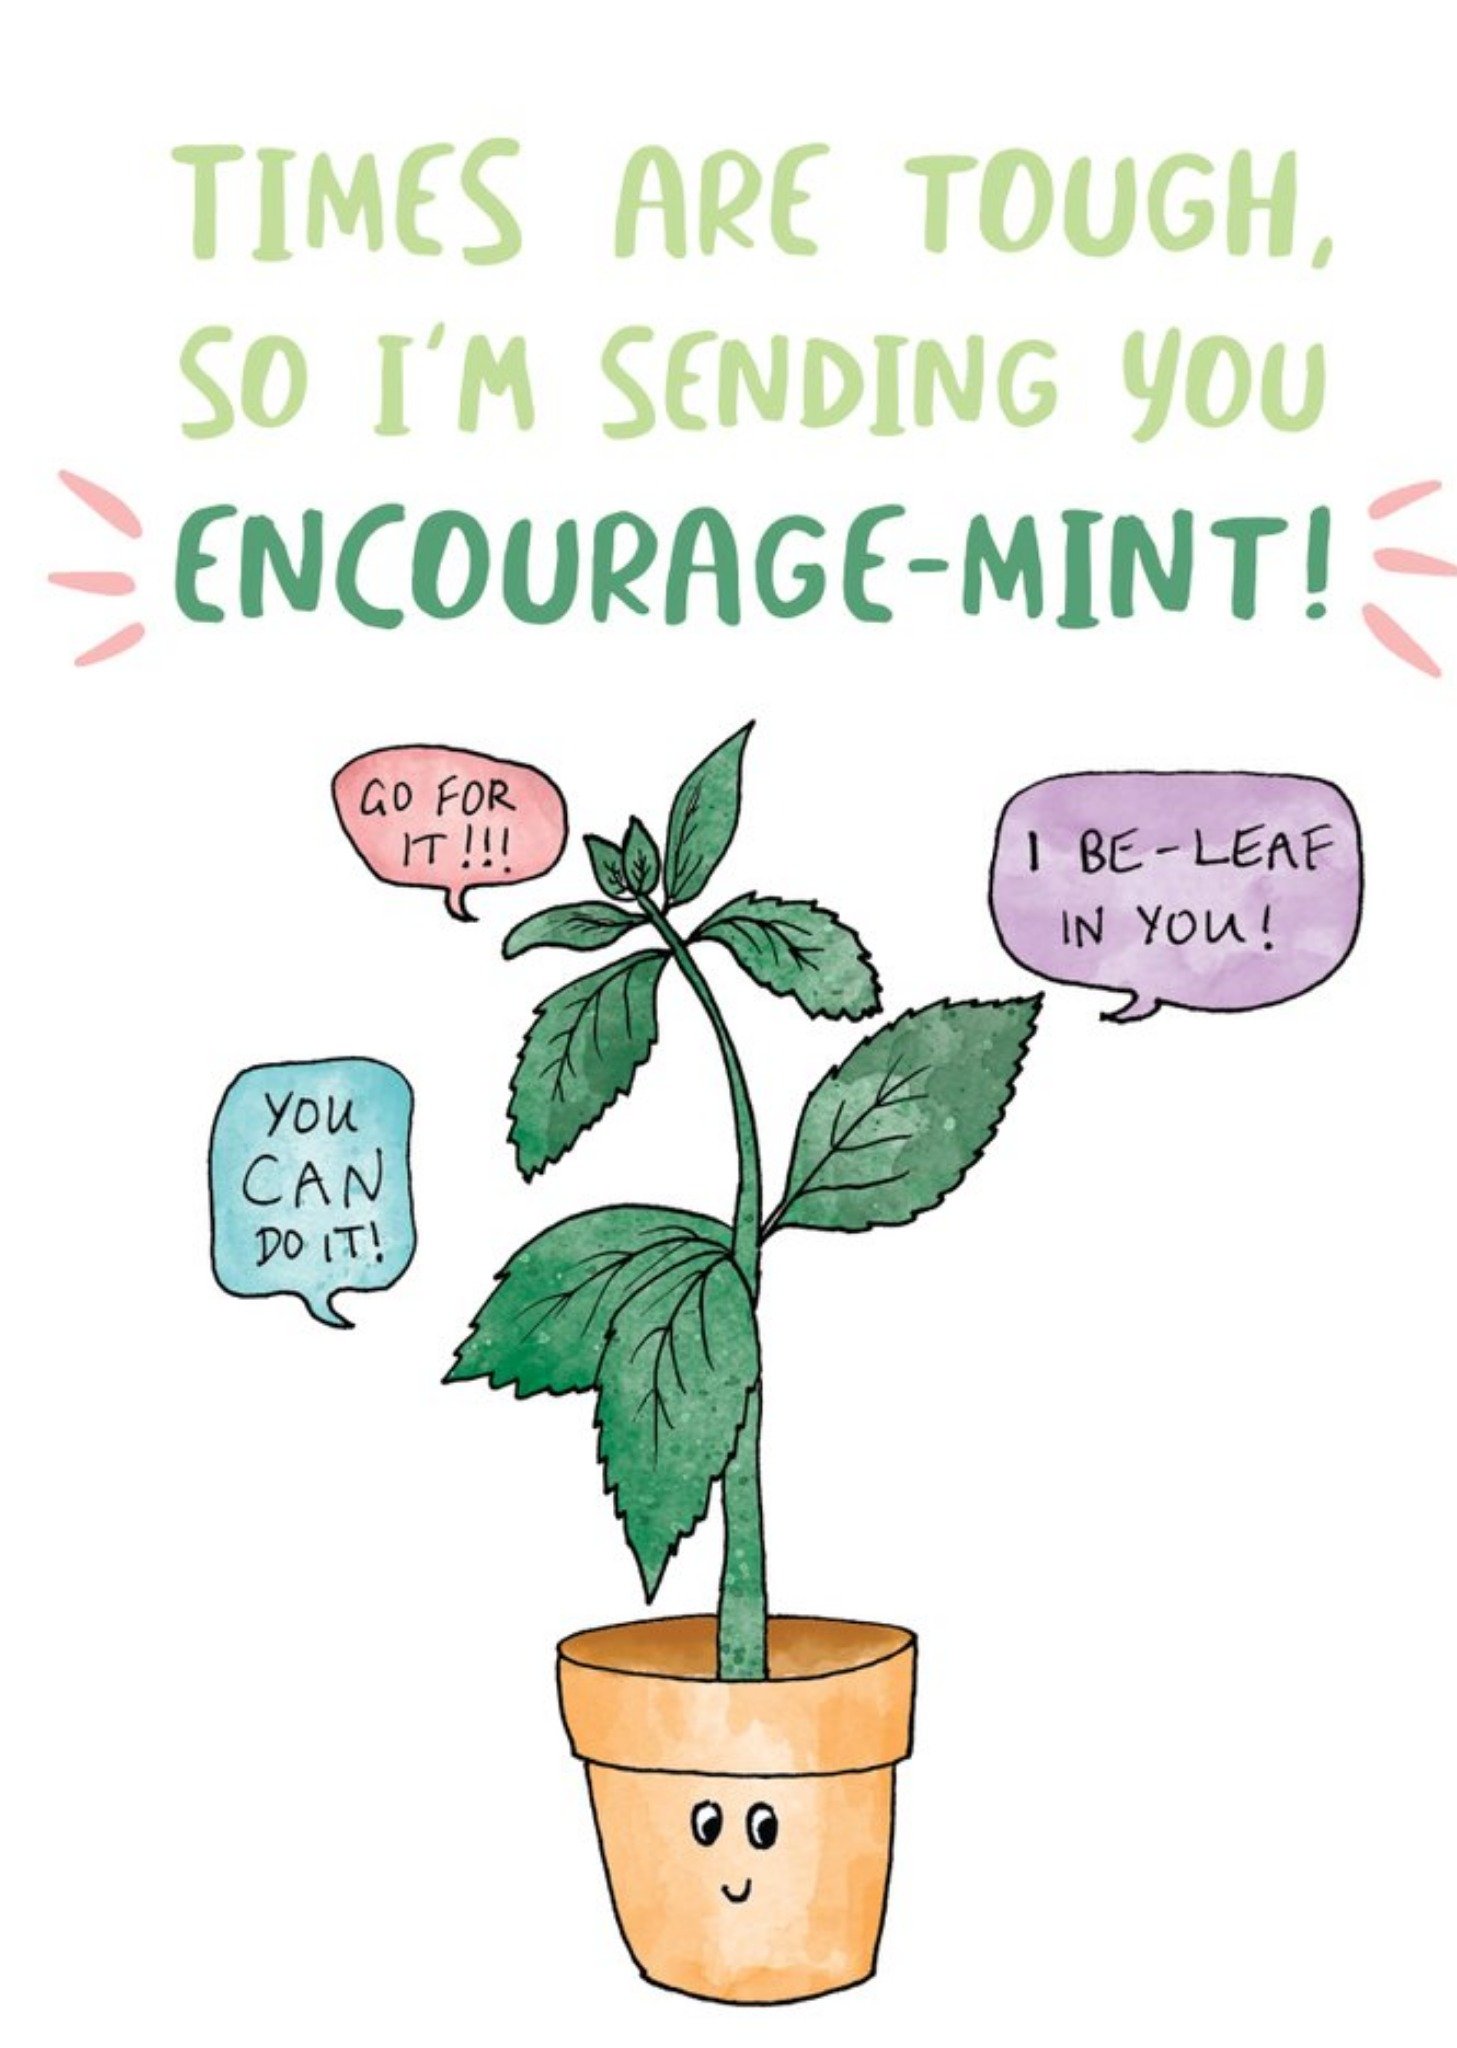 Moonpig Puntastic Times Are Tough So I'm Sending You Encourage-Mint Card, Large